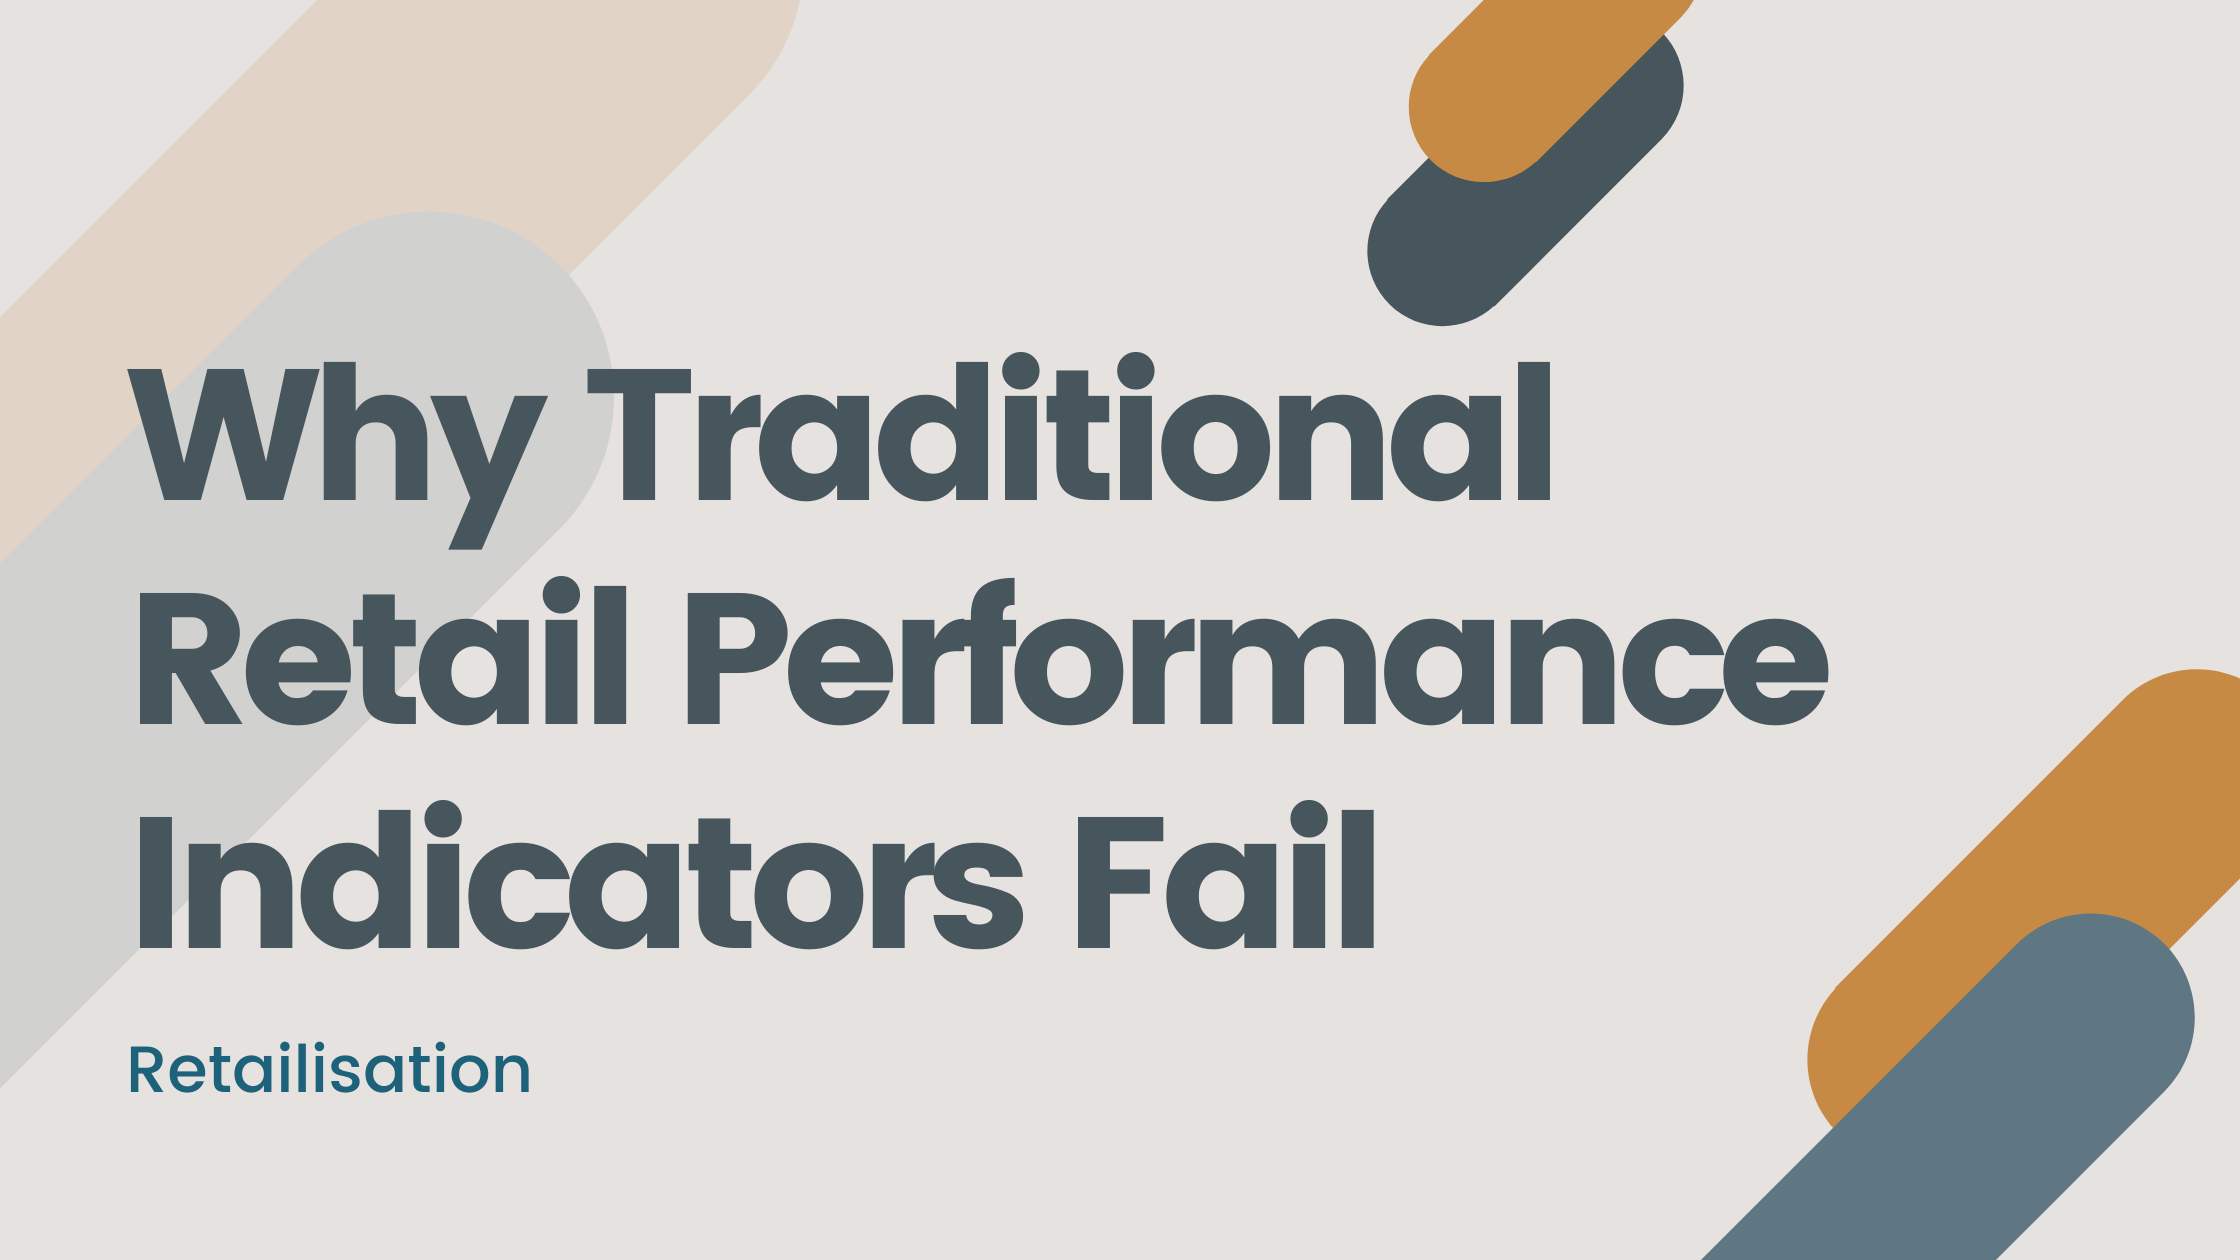 Why Traditional Retail Performance Indicators Fail